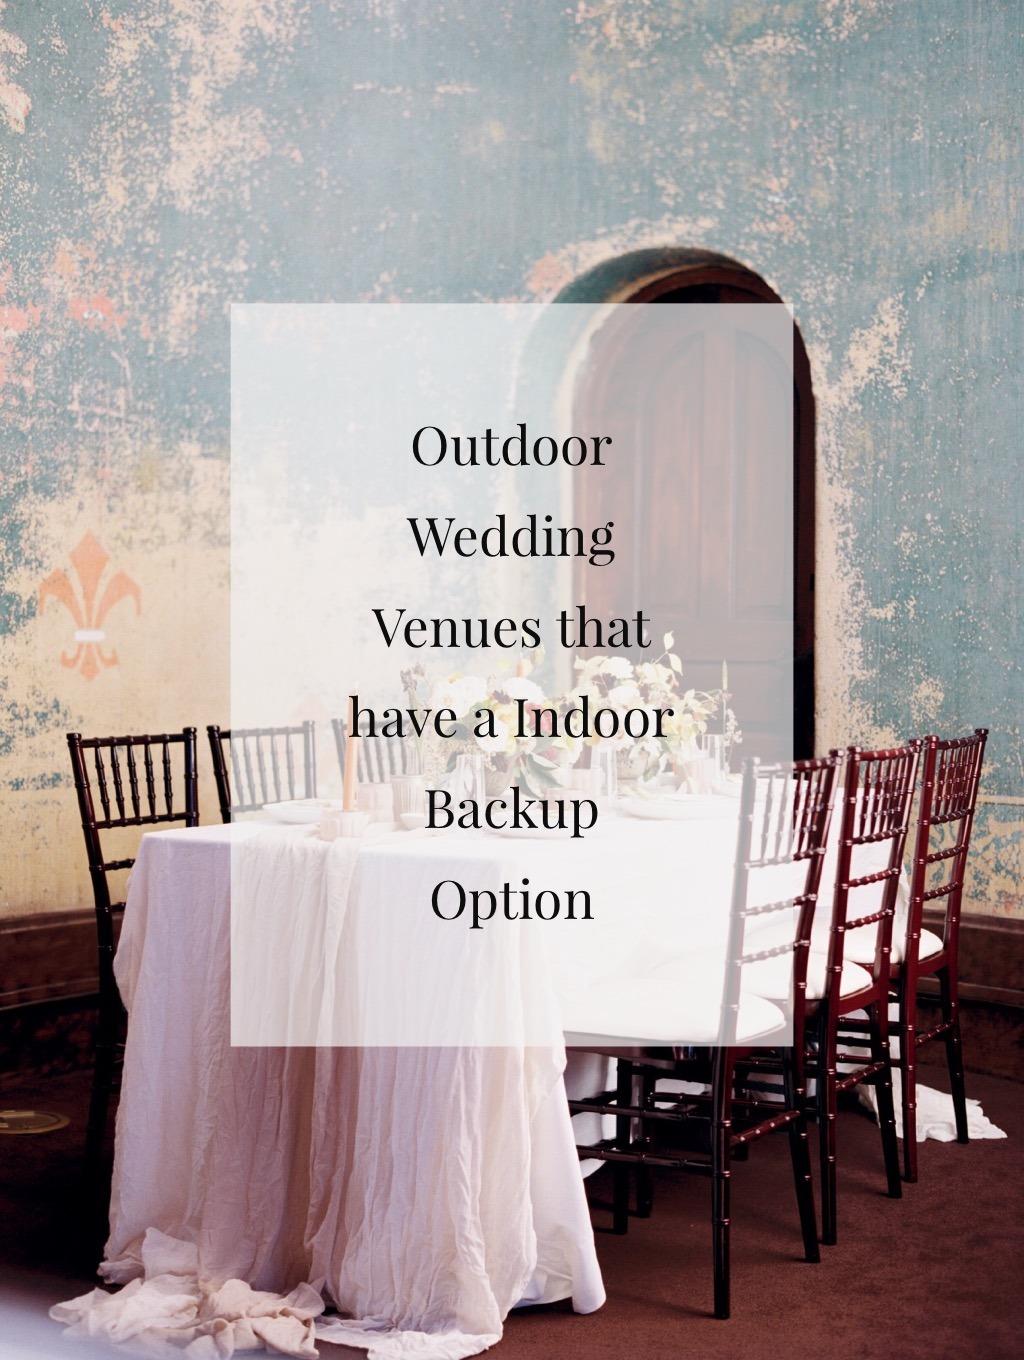 Outdoor Wedding Venues with an Indoor Backup Option